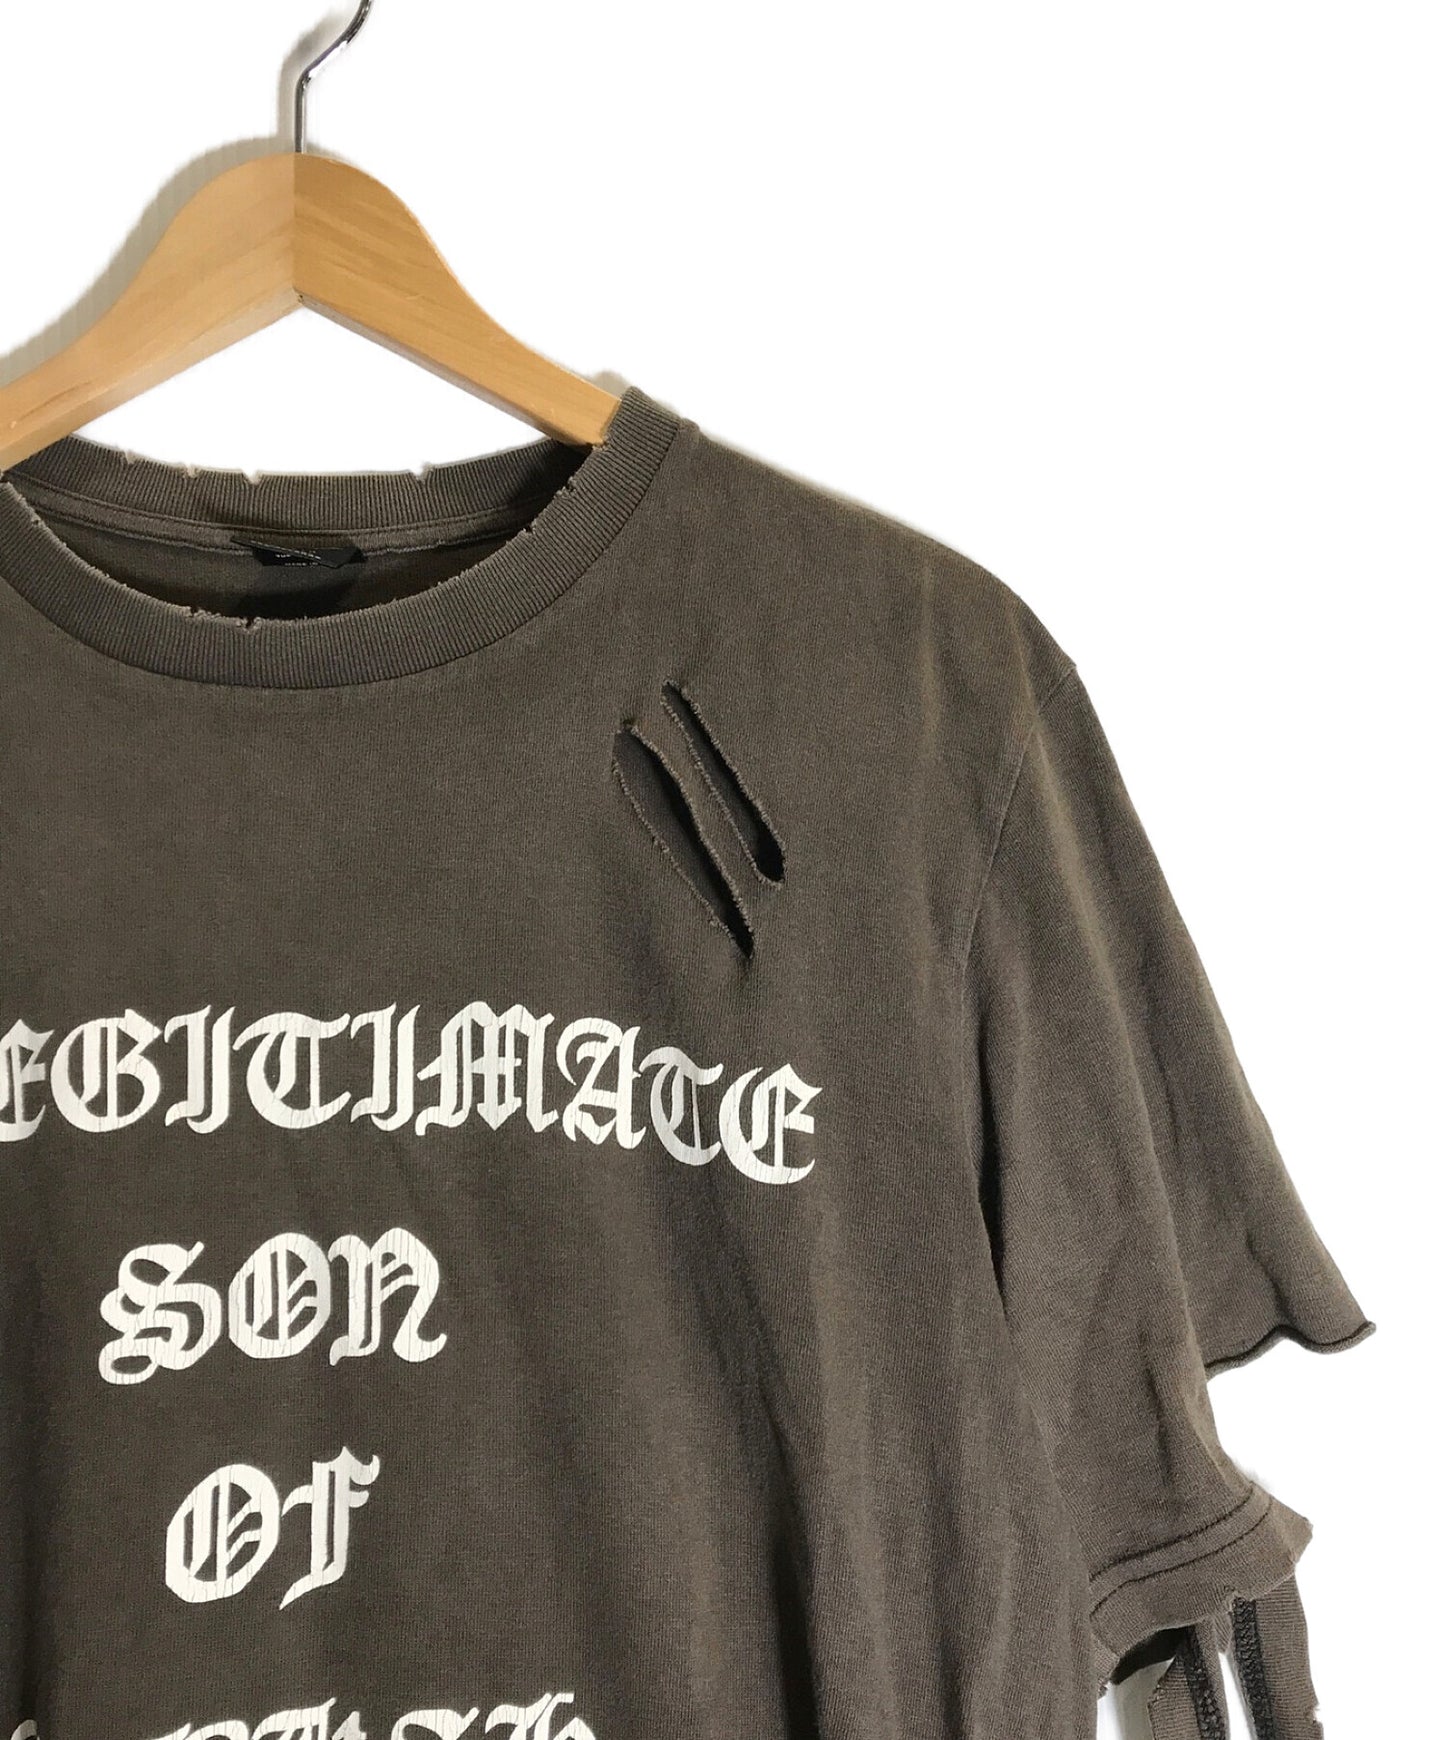 NUMBER (N)INE 04AW "GIVE PEACE A CHANCE Period" Crushed message print T-shirt